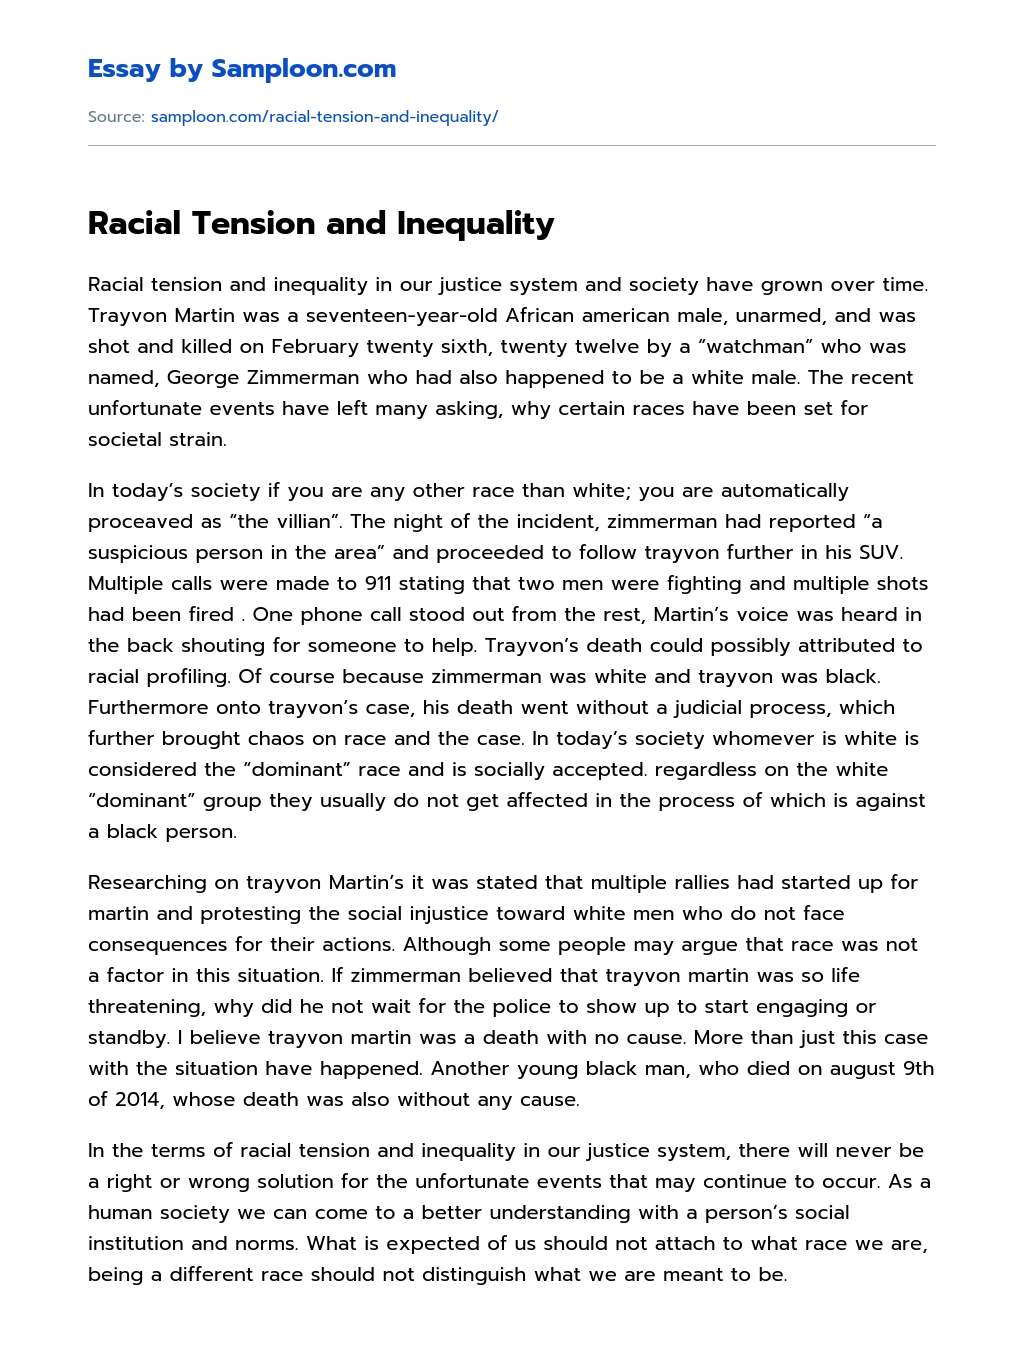 Racial Tension and Inequality essay